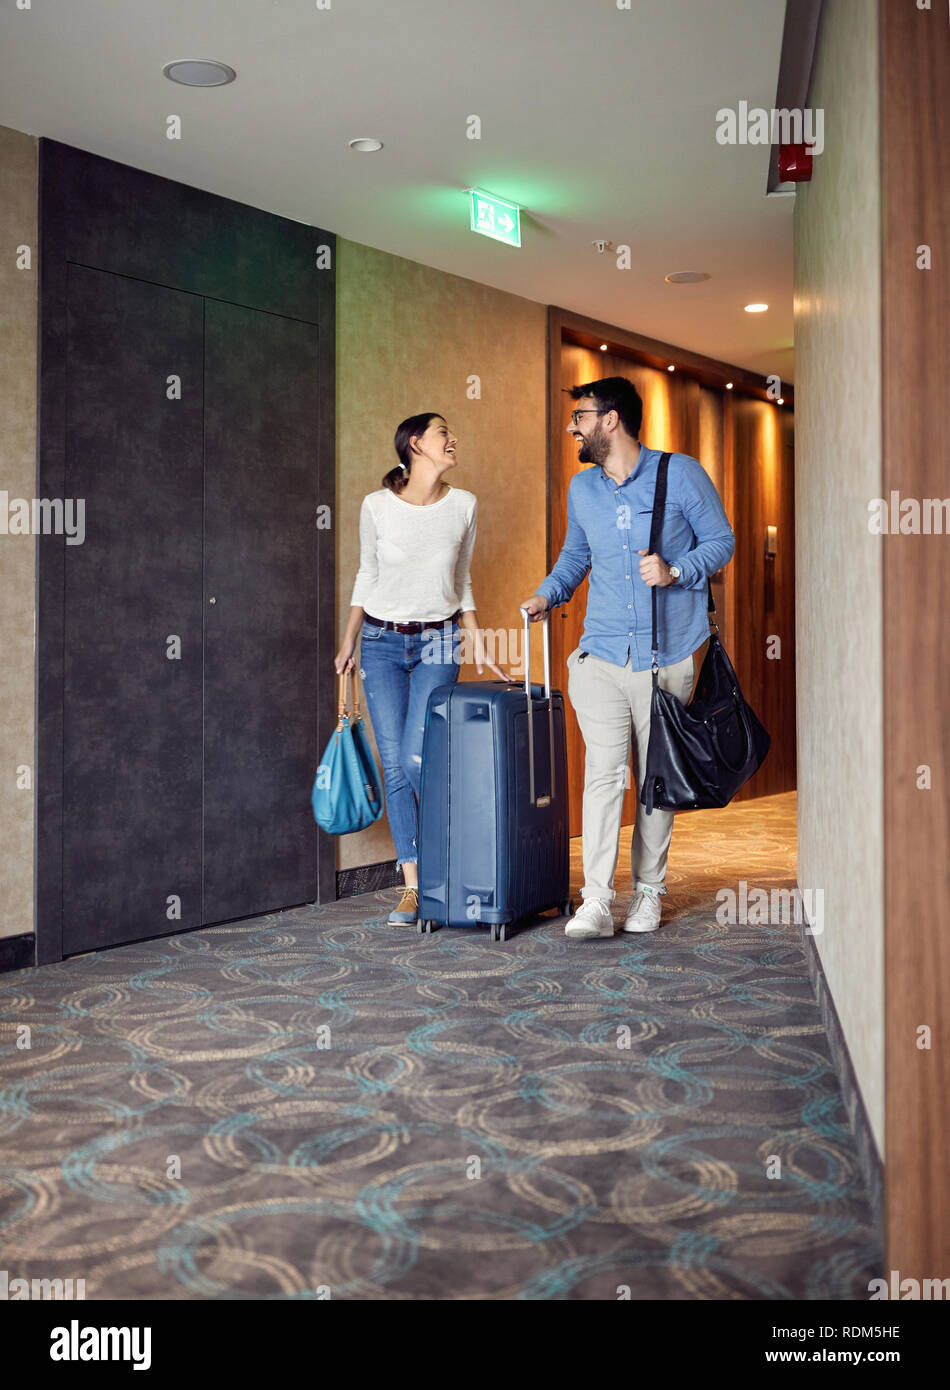 Smiling man and woman arriving at hotel lobby with suitcase Stock Photo